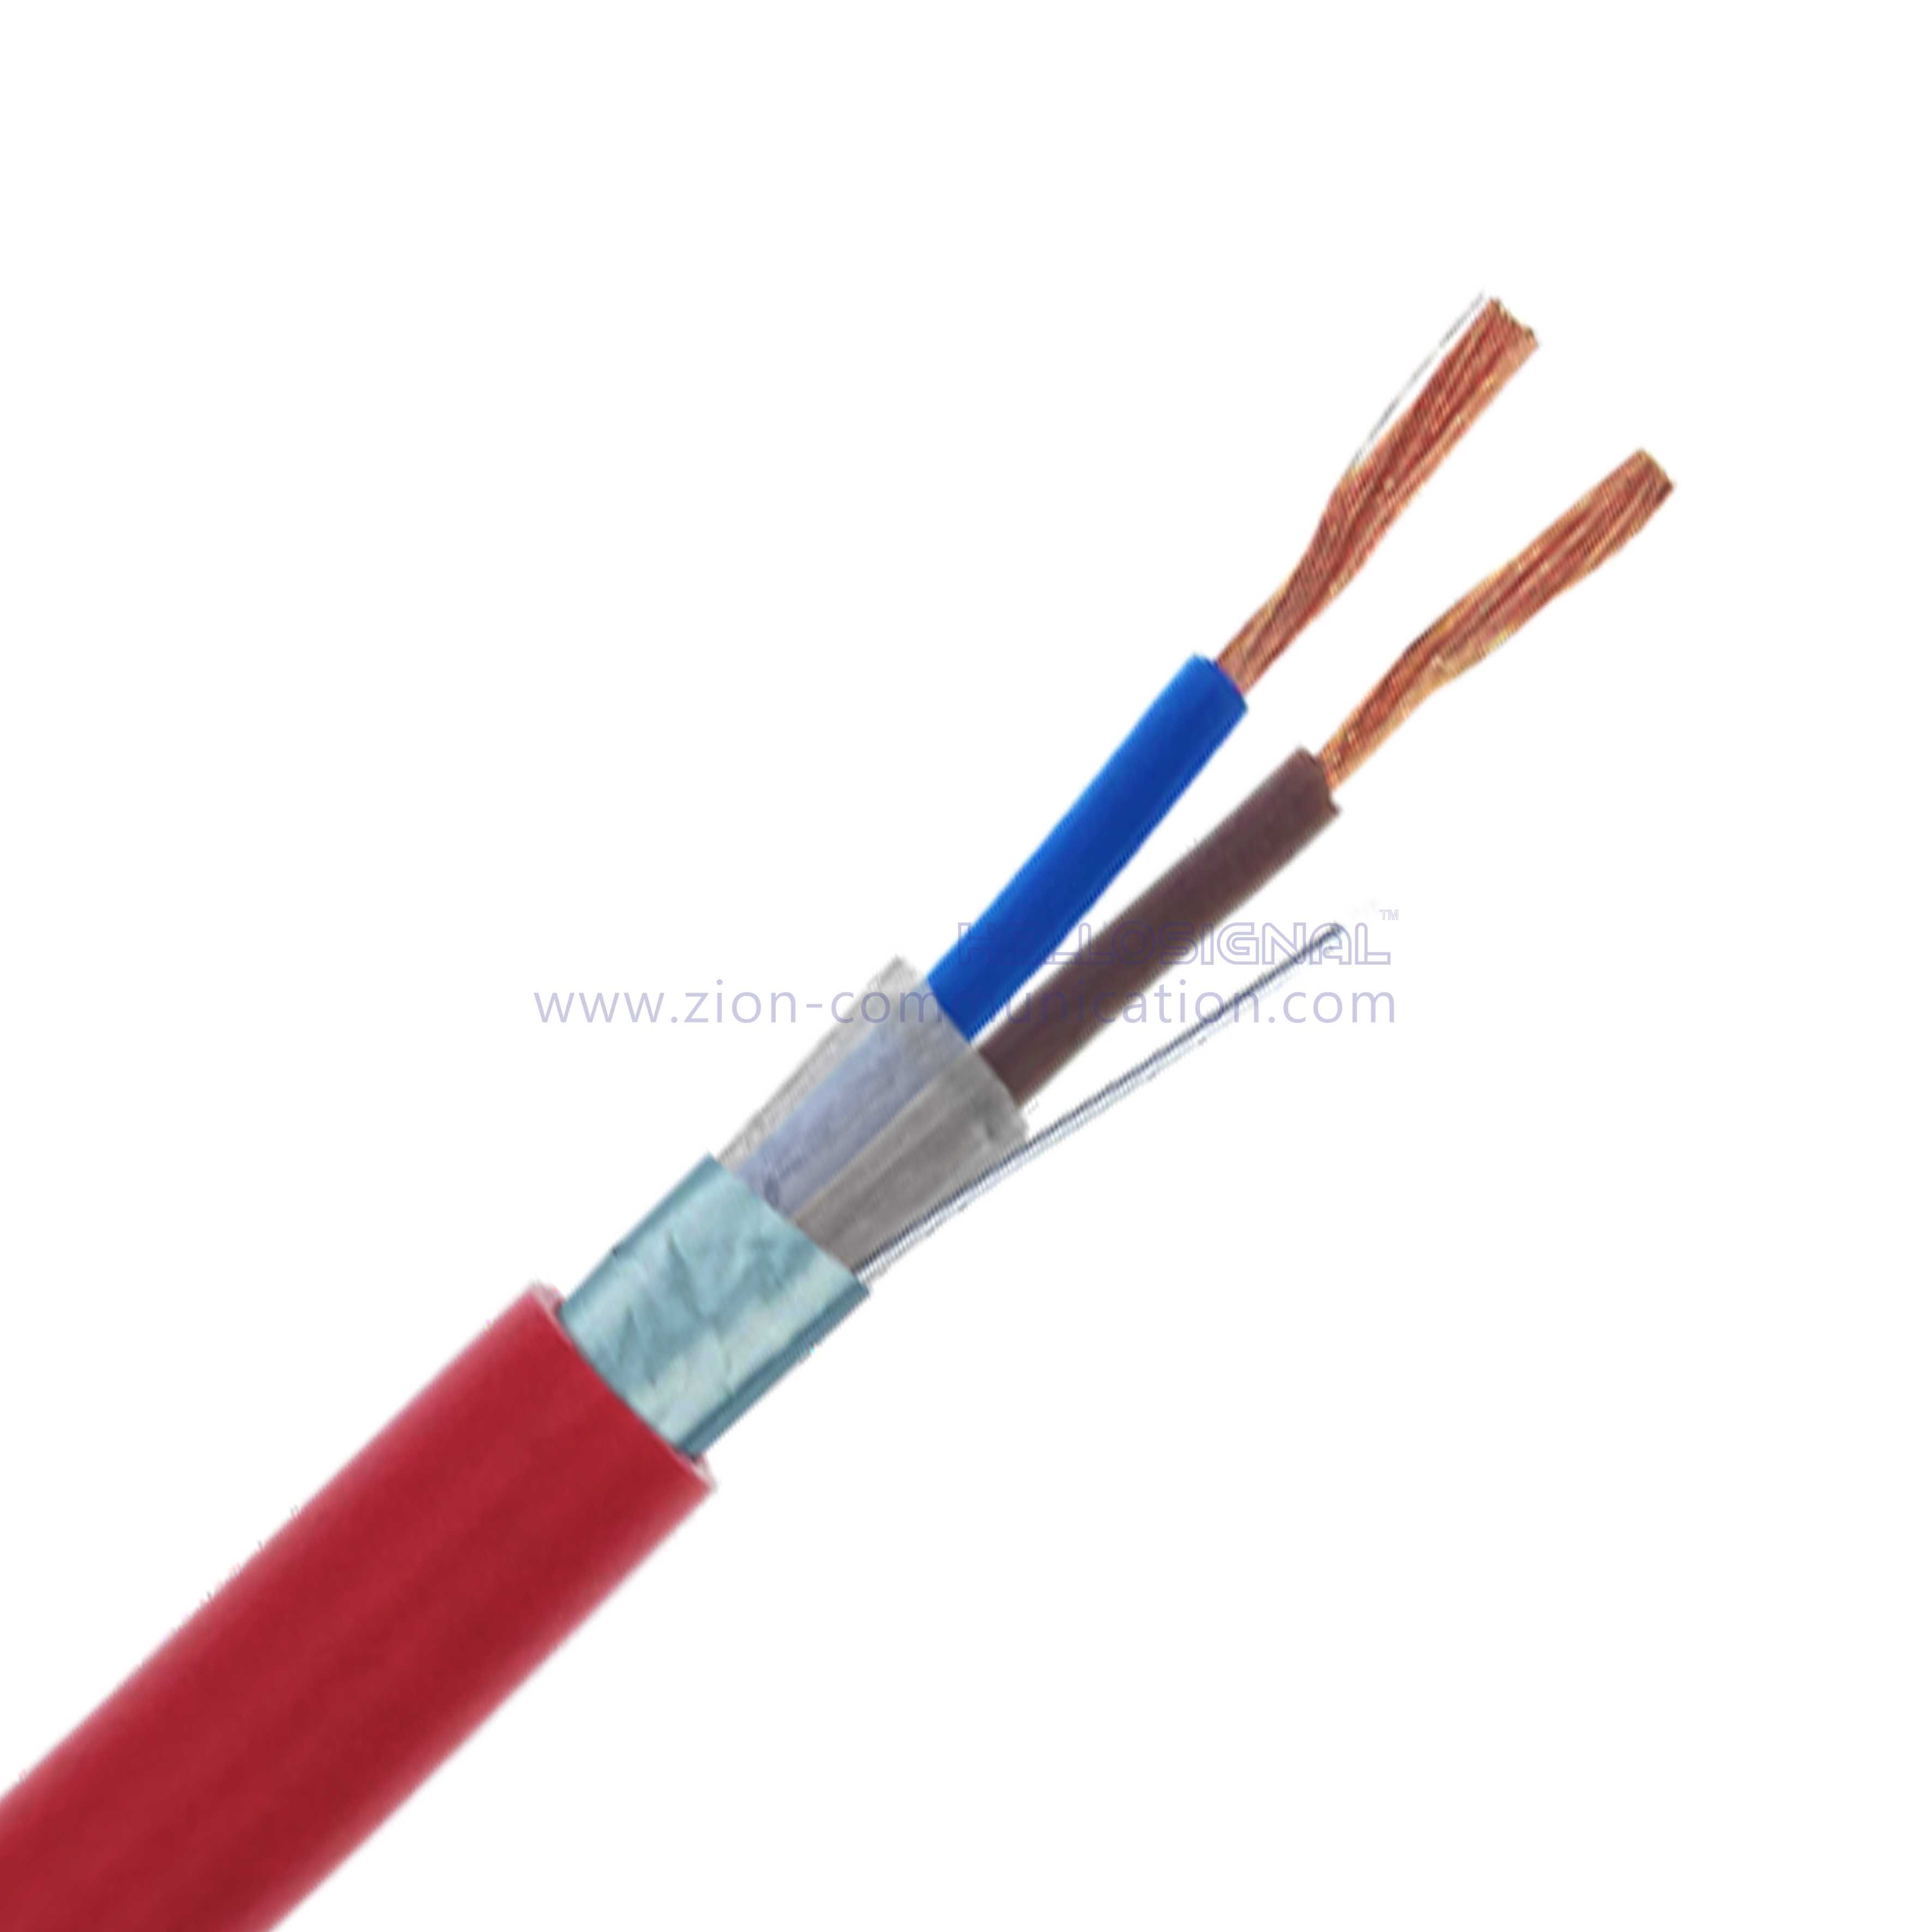 PH30 2×1.5mm² Fire Alarm Cables from China manufacturer - ZION 